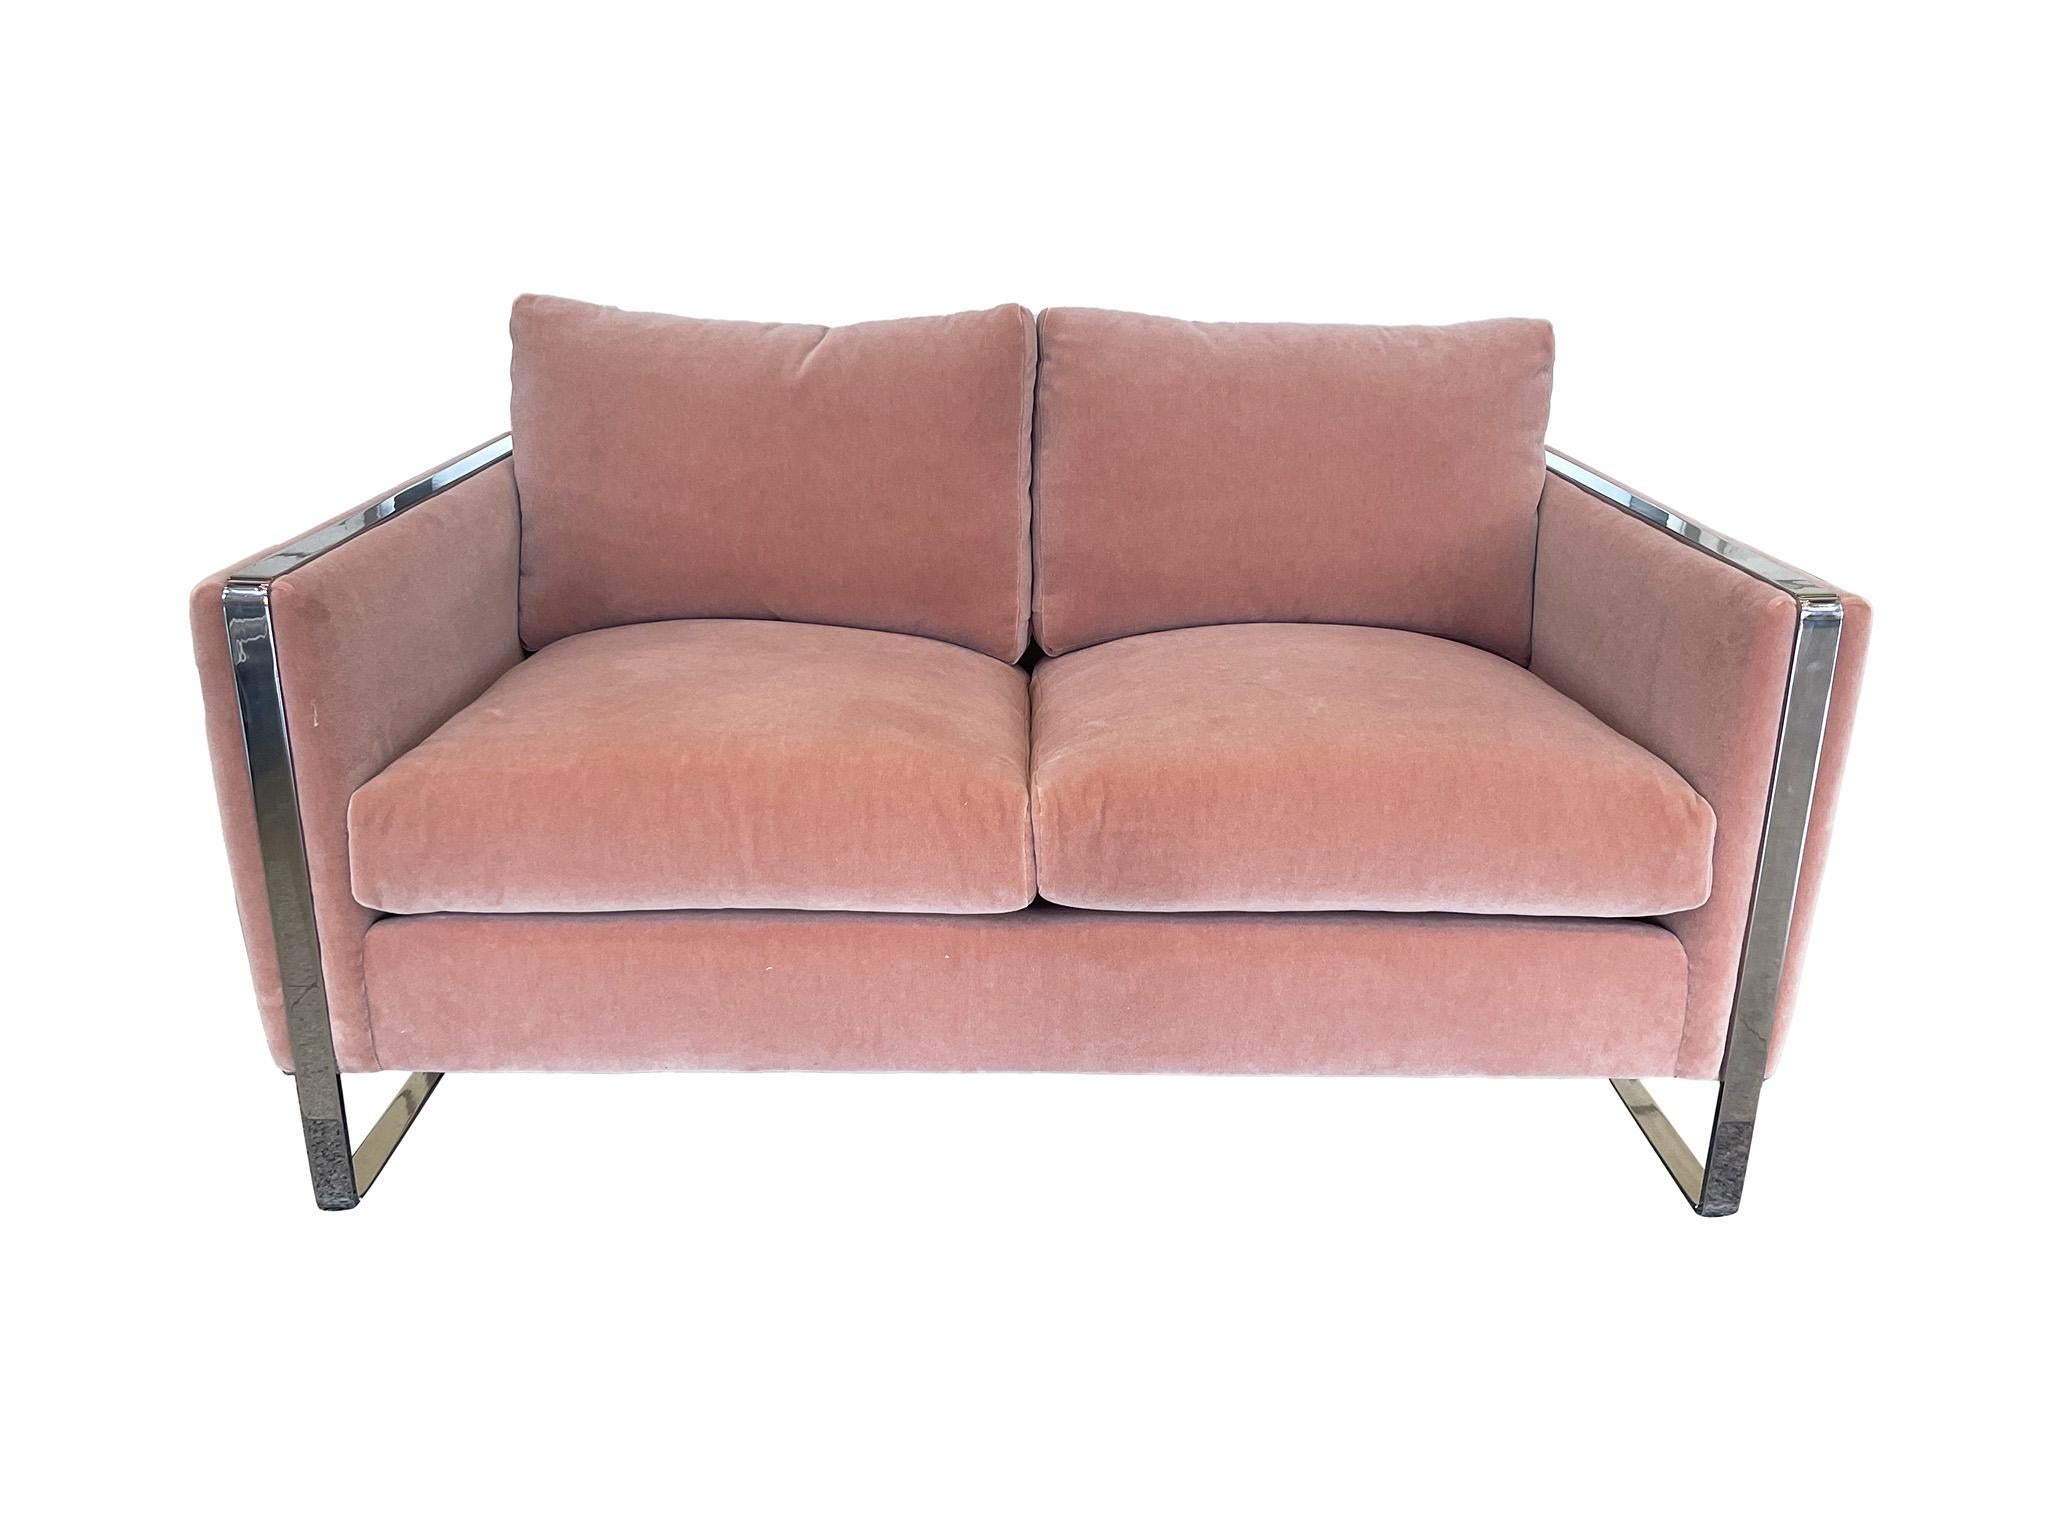 Wonderful midcentury chrome frame loveseat sofa in the style of legendary American designer Milo Baughman. Characterized by its sleek profile, clean lines, and subtly curved edges, this sofa is an excellent example of midcentury American furniture